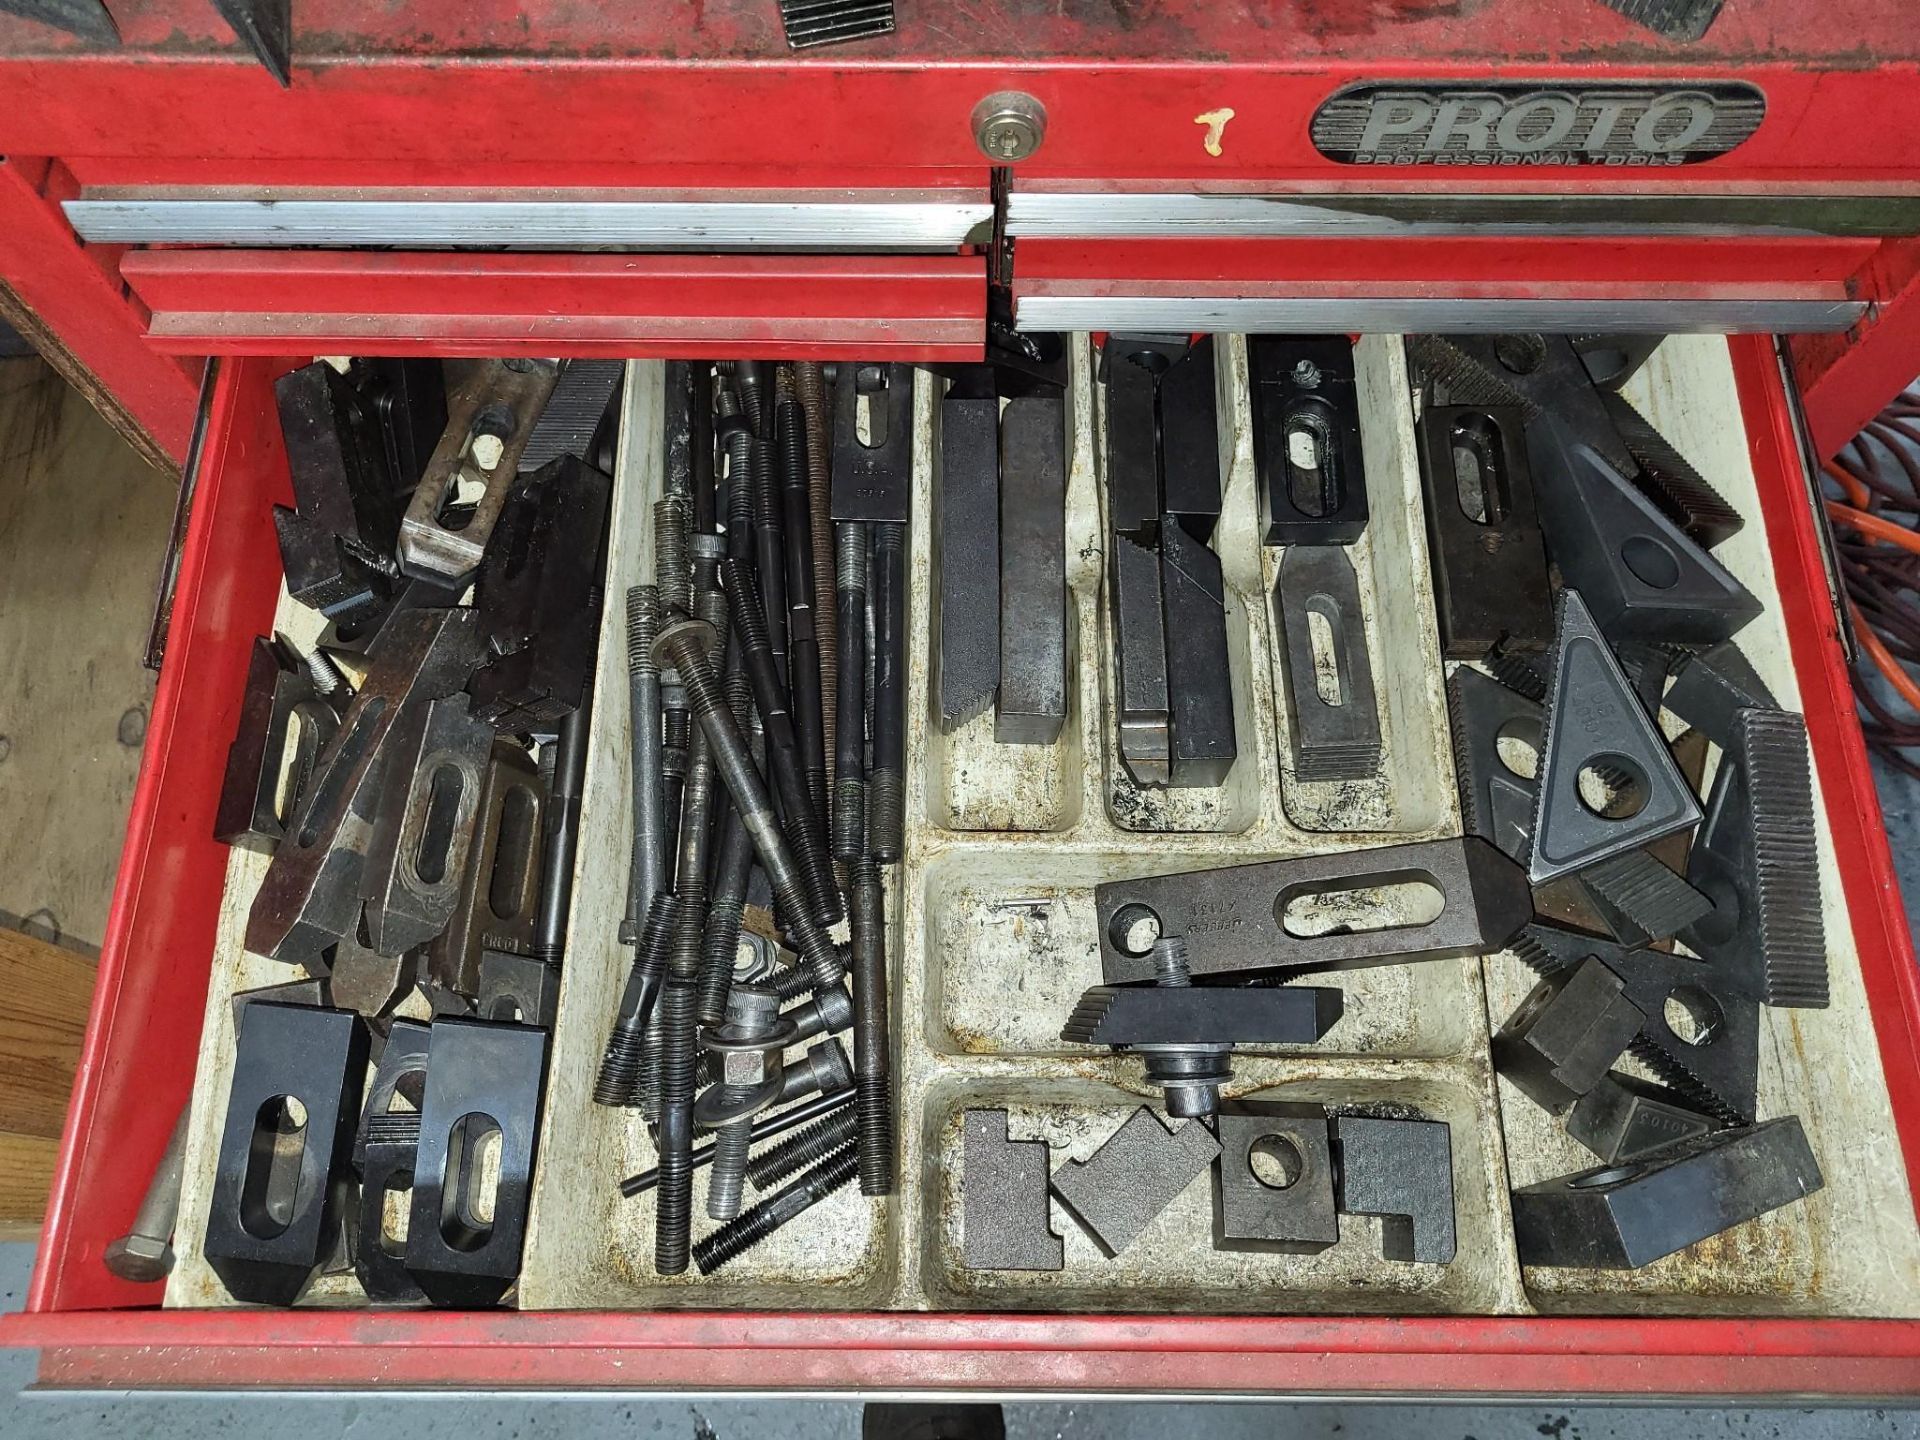 LARGE LOT OF MILLING TOOLS, TAPS, CARBIDE INSERTS, SETUP HARDWARE AND HAND TOOLS - Image 5 of 24